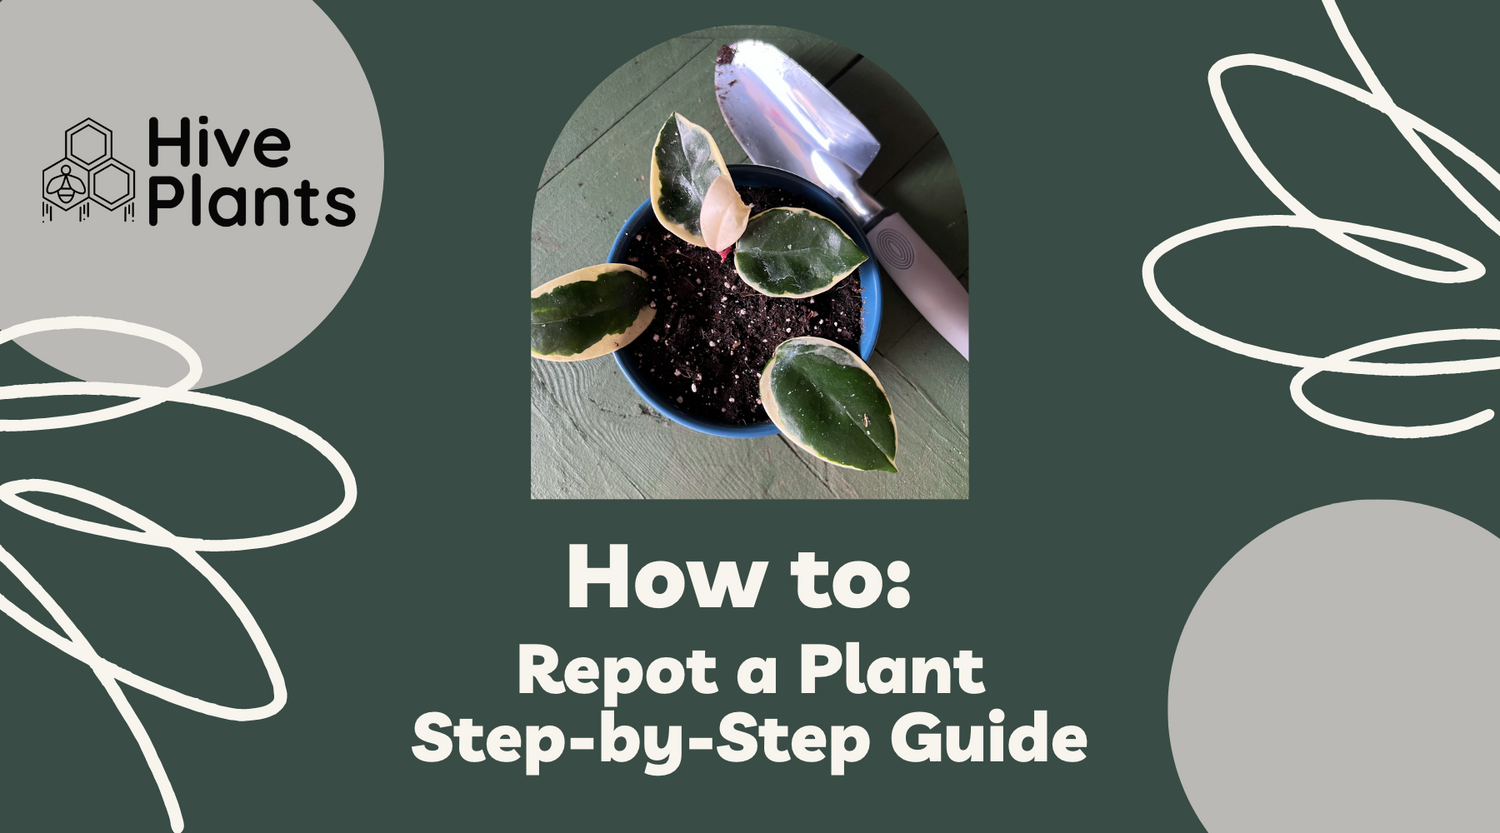 How to: Repot a Plant; A Step-by-Step Guide